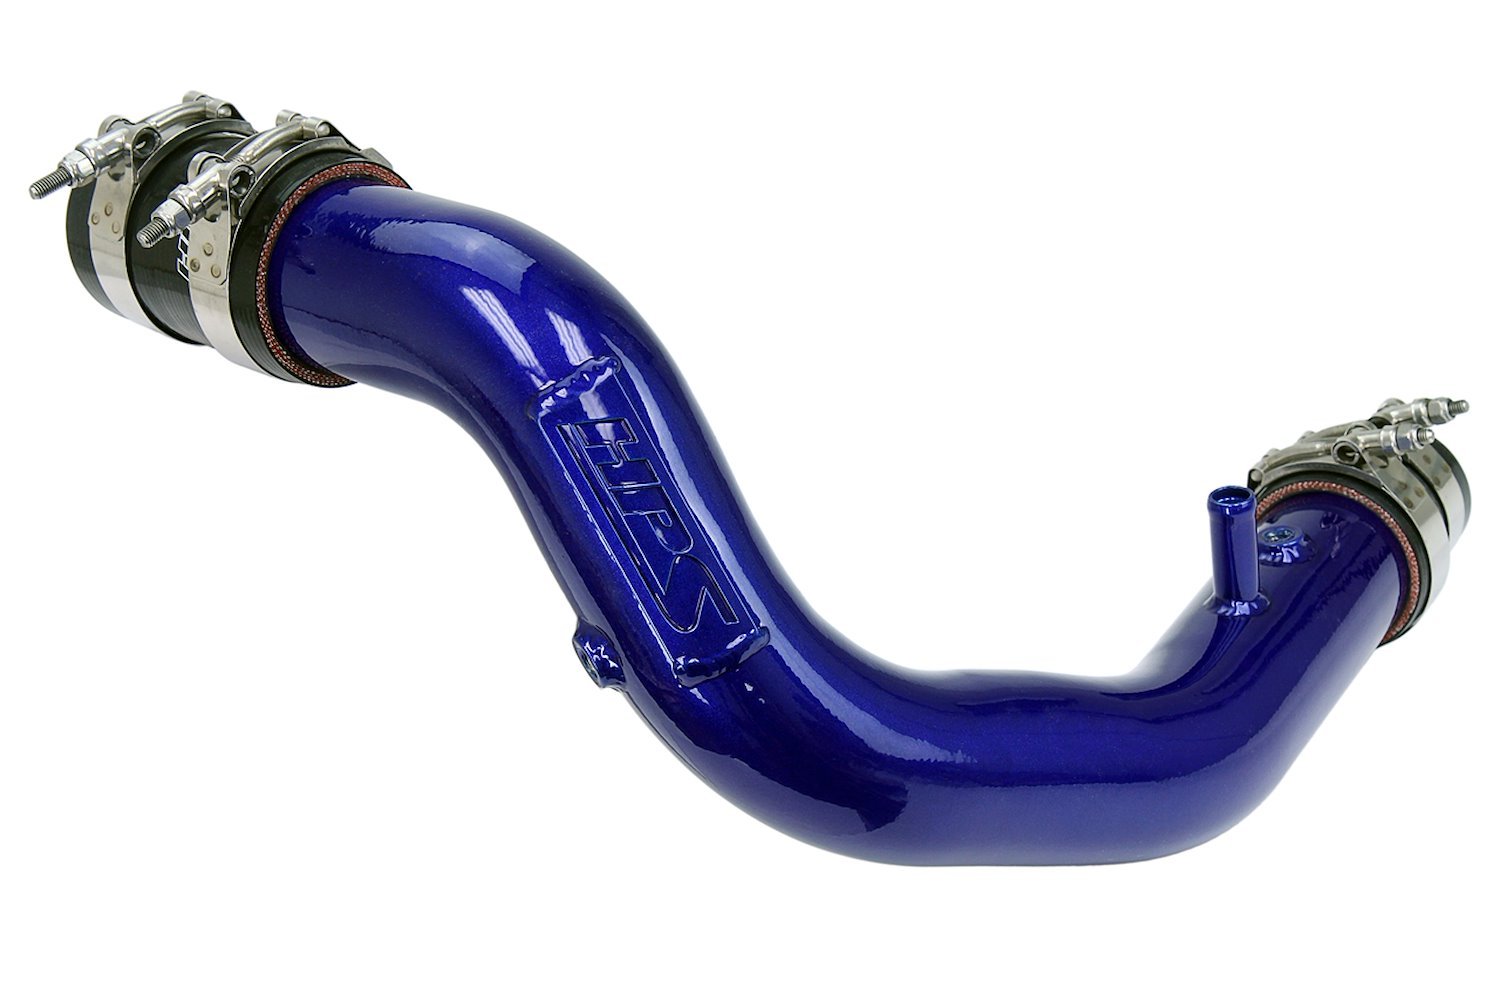 17-122BL Turbo Charge Pipe Kit, Dyno Proven +6.6 HP, +9.1 TQ, Reduce Turbo Lag, 2.5 in. Pipe